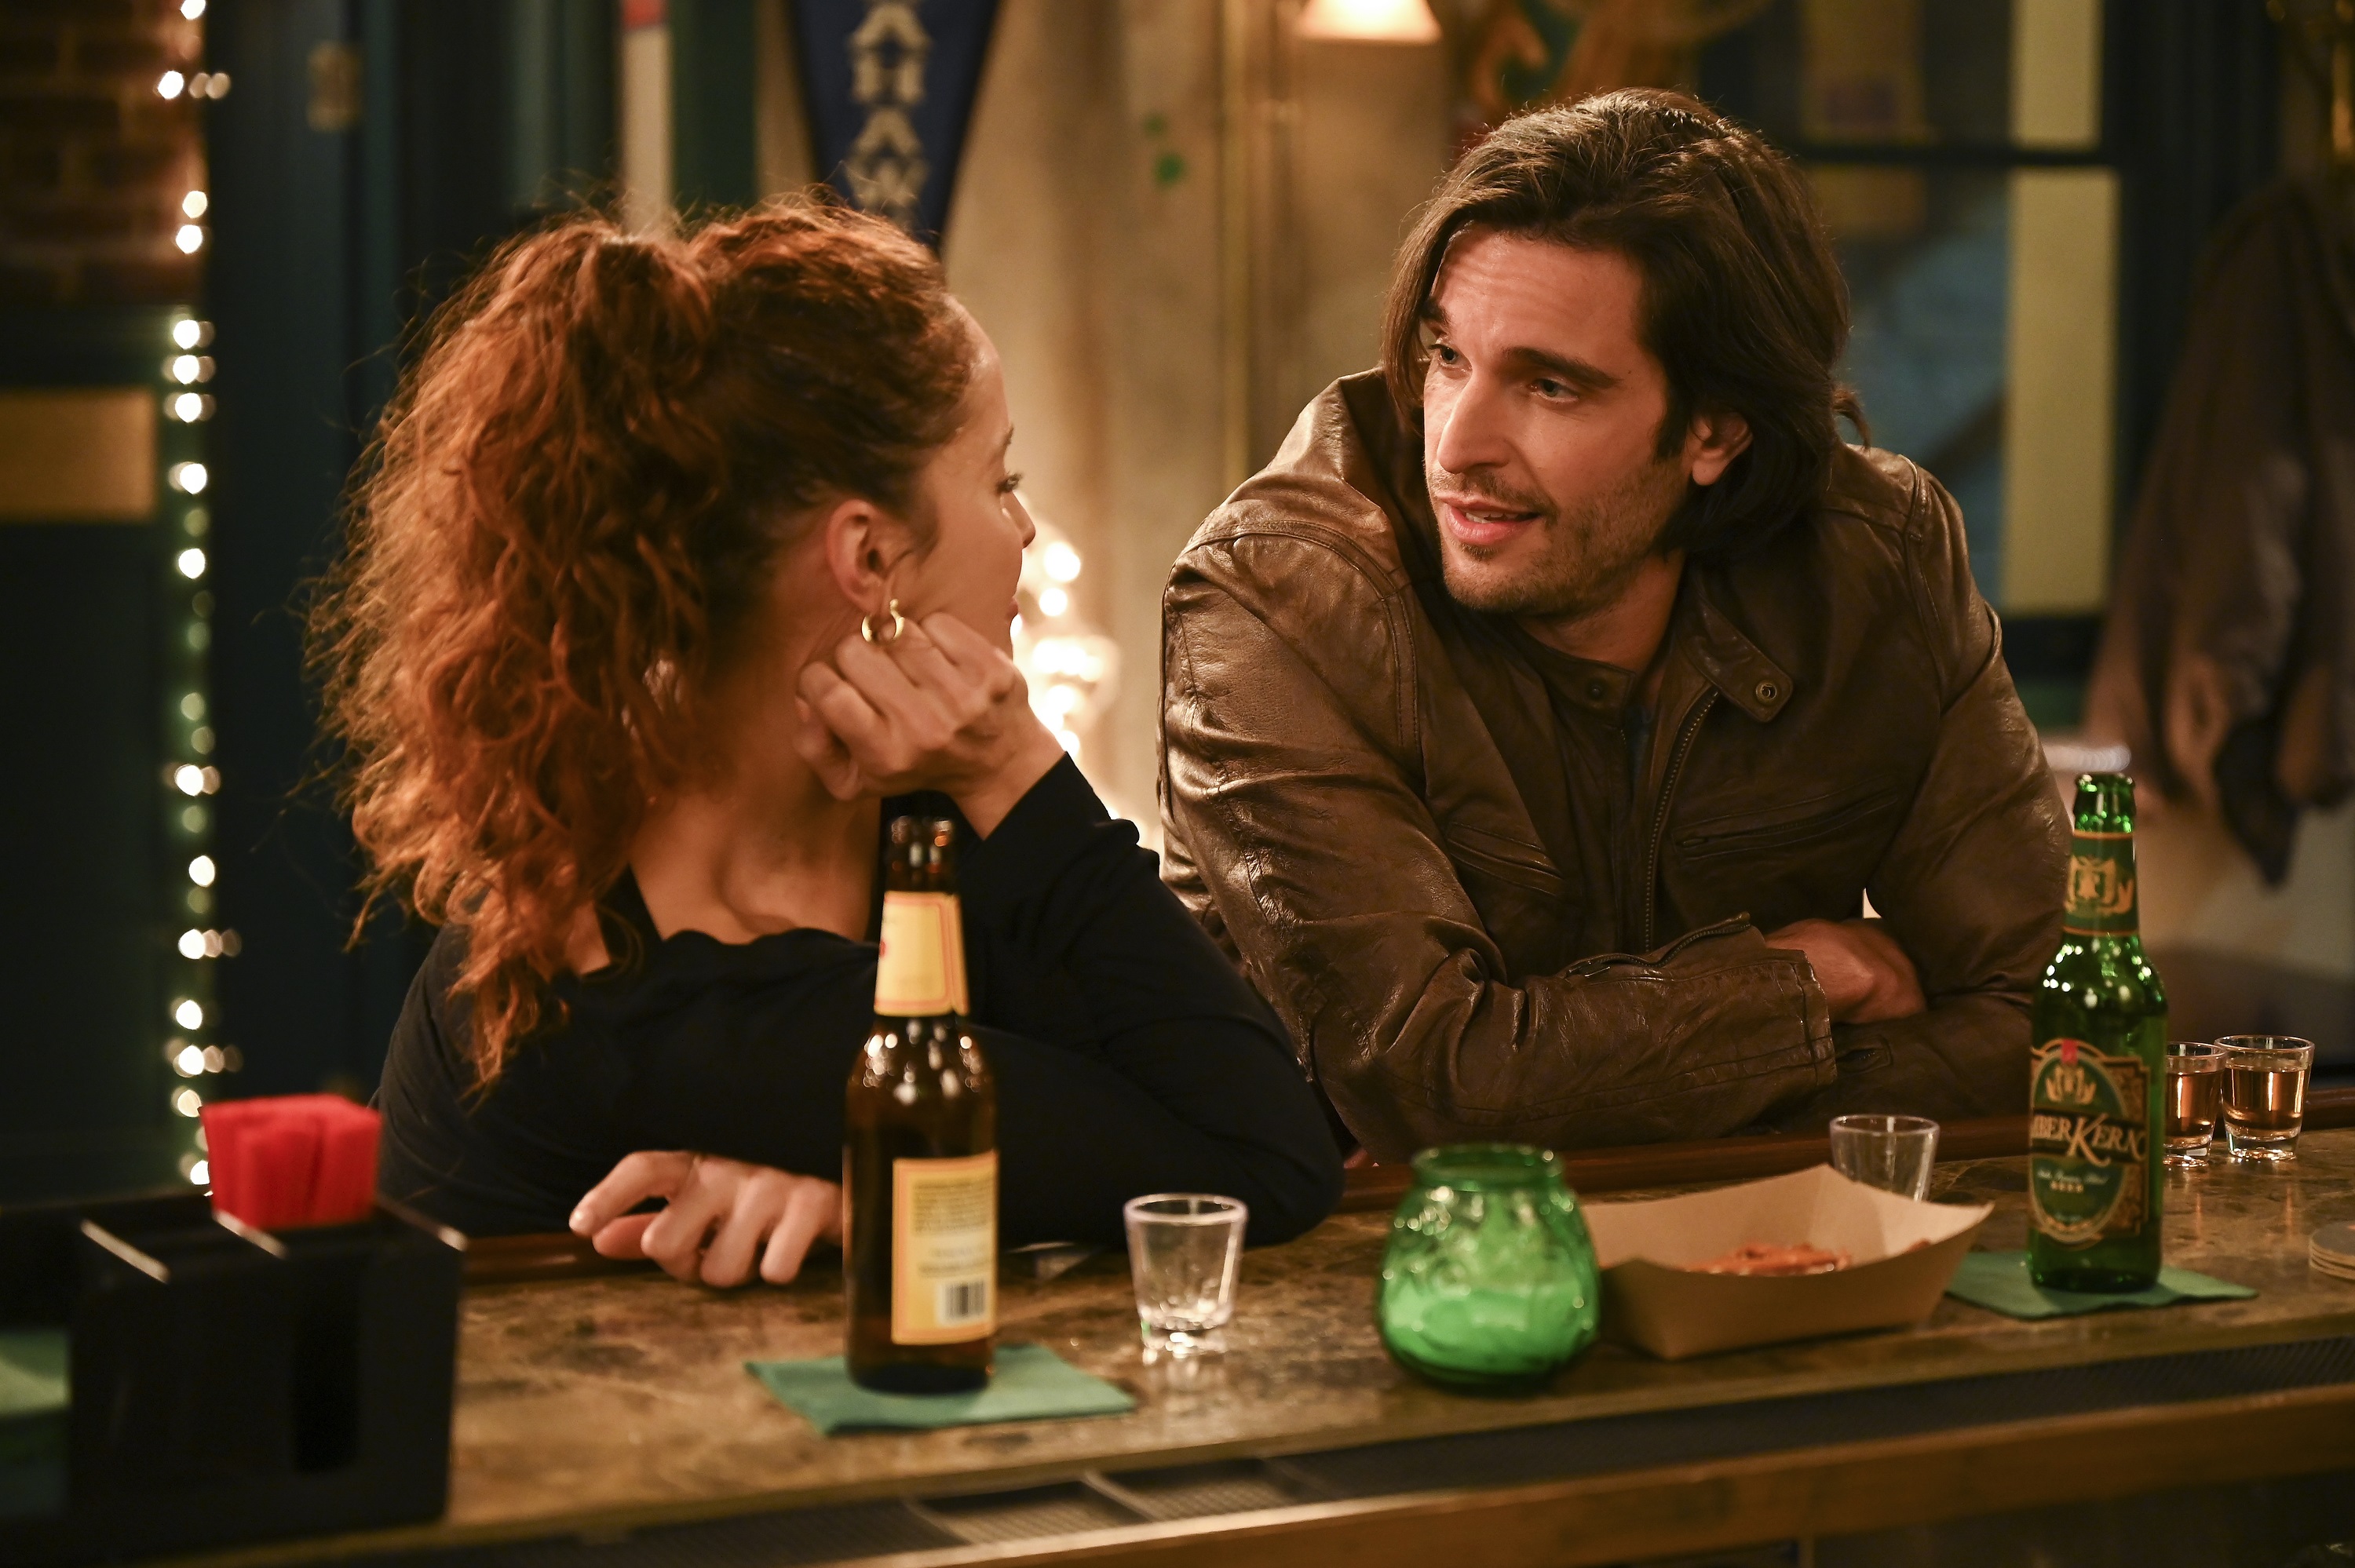 'Station 19' Jaina Lee Ortiz playing Andy Herrera as she talks to a new love interest, played by Daniel Di Tomasso